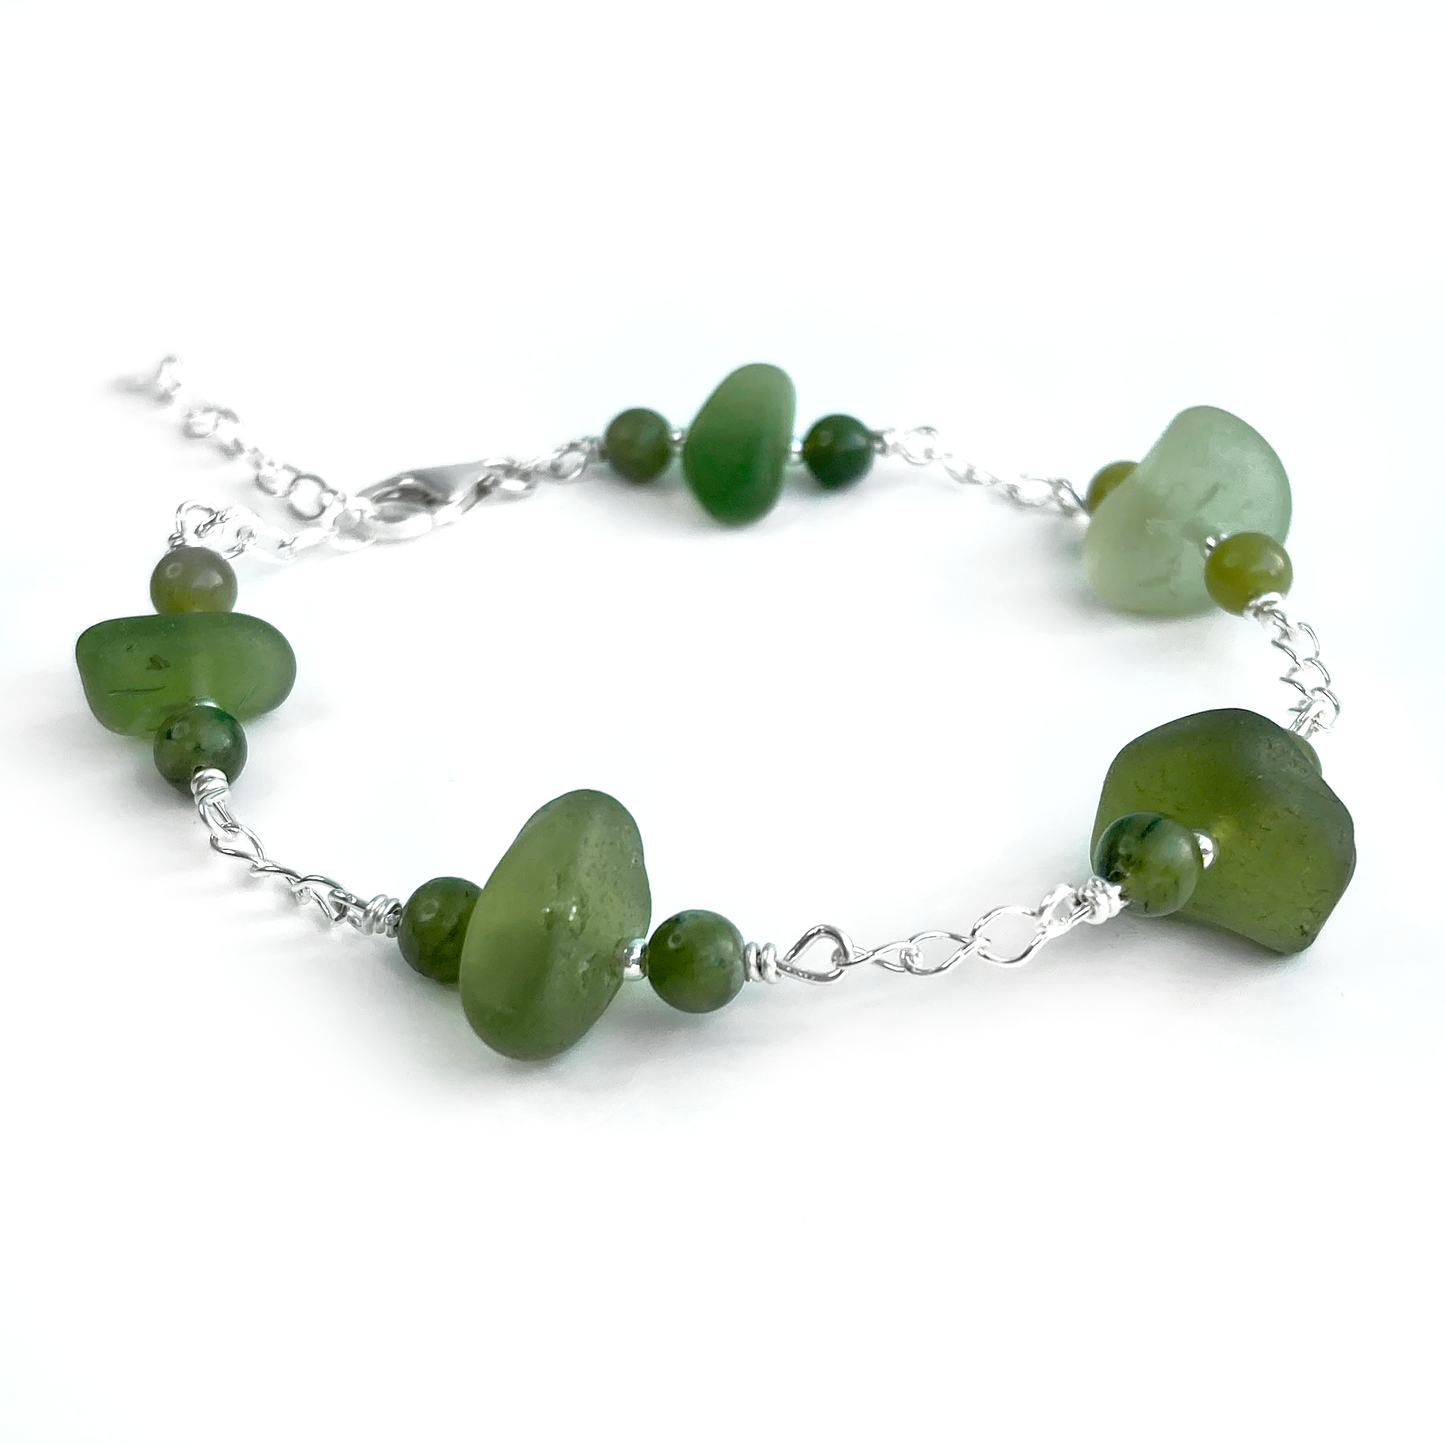 Green Sea Glass Bracelet with Jade Crystal Beads - Sterling Silver Scottish Jewellery